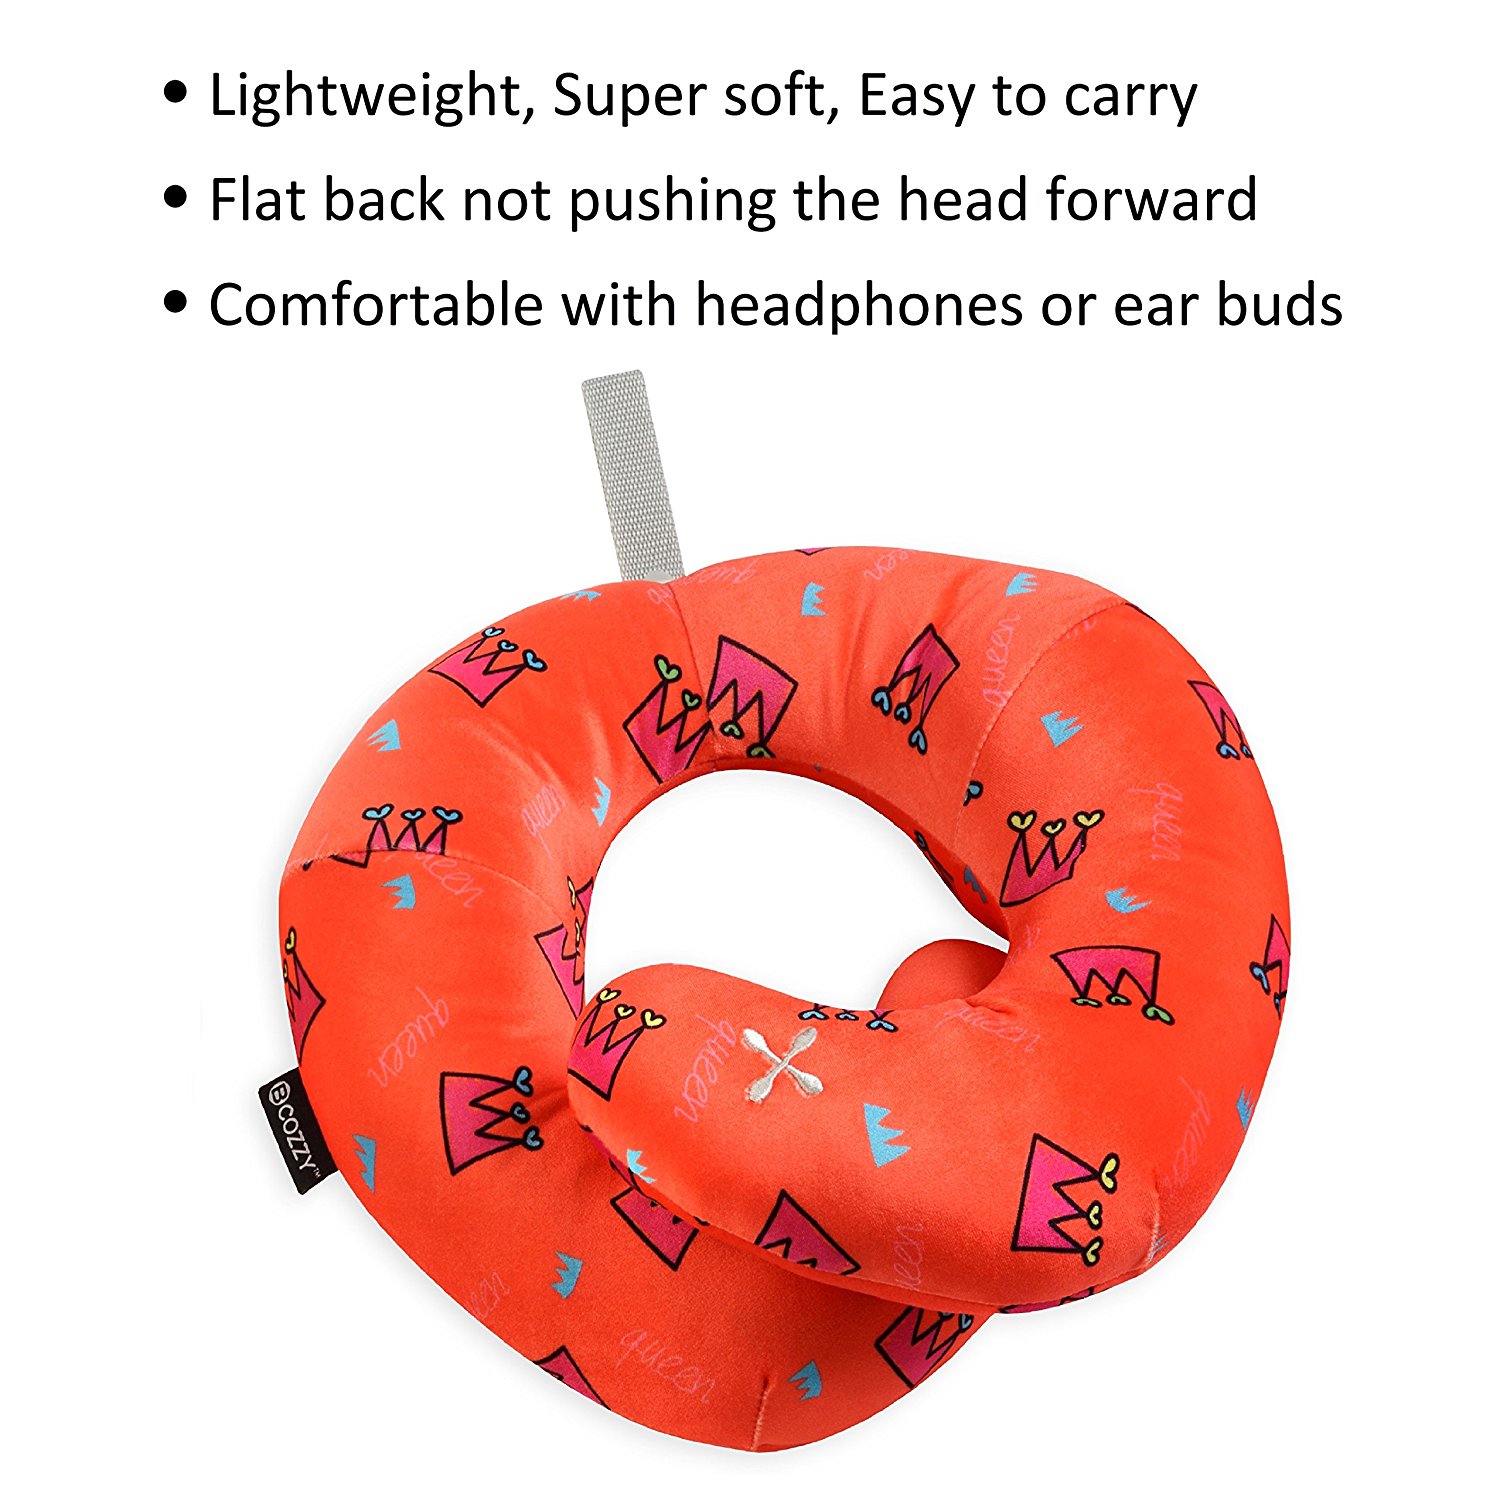 Buy Best Travel Pillow For Airplanes Online At Lowest Prices